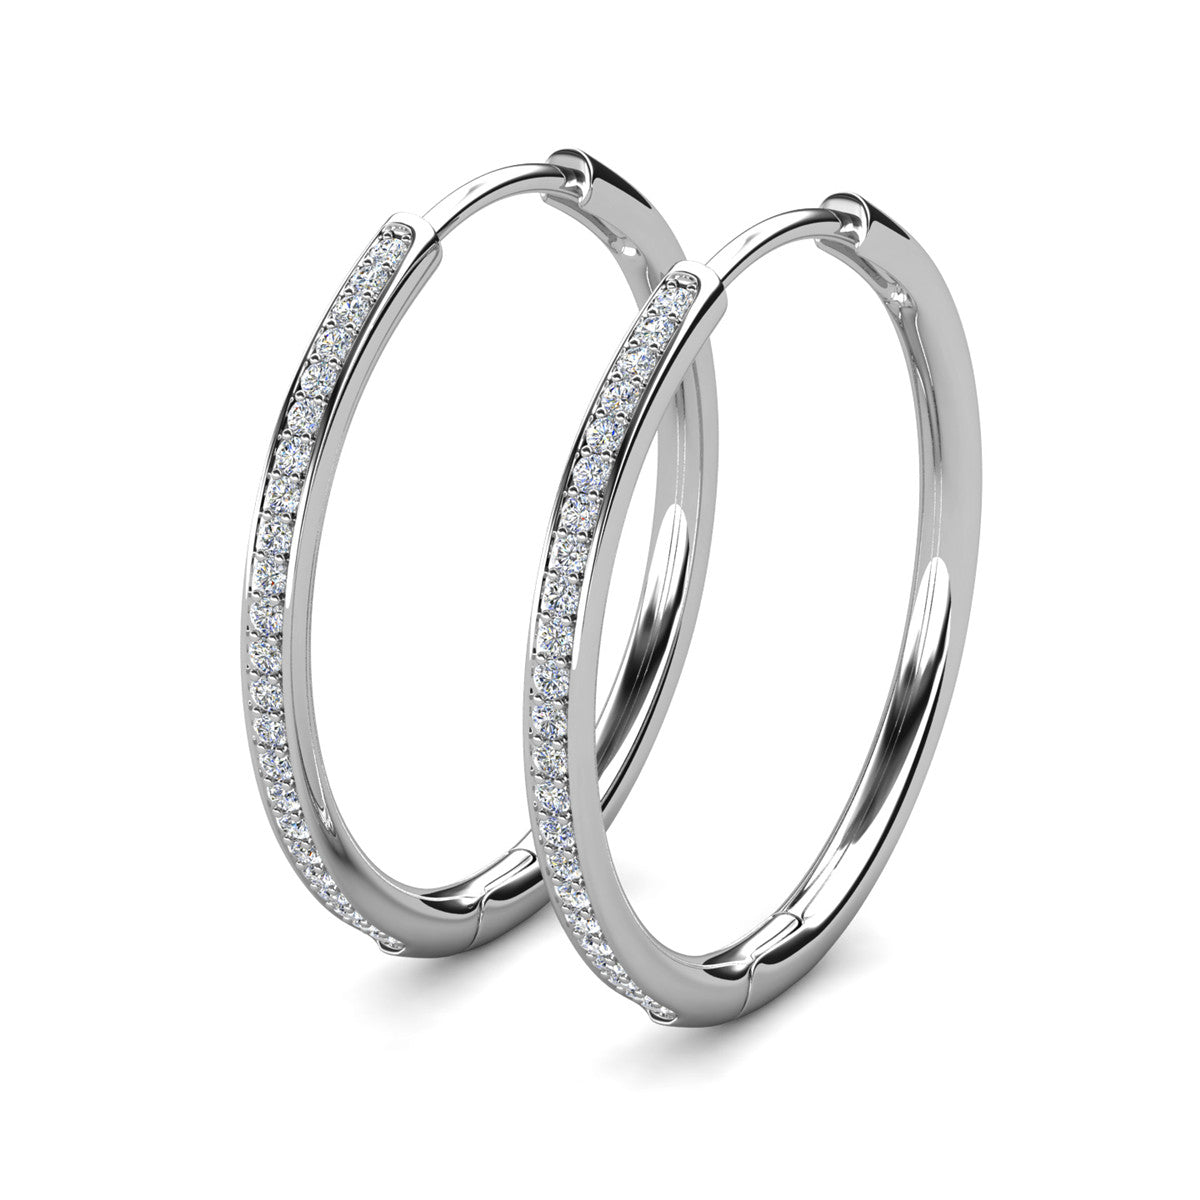 Moissanite by Cate & Chloe Delaney Sterling Silver Hoop Earrings with Moissanite Crystals